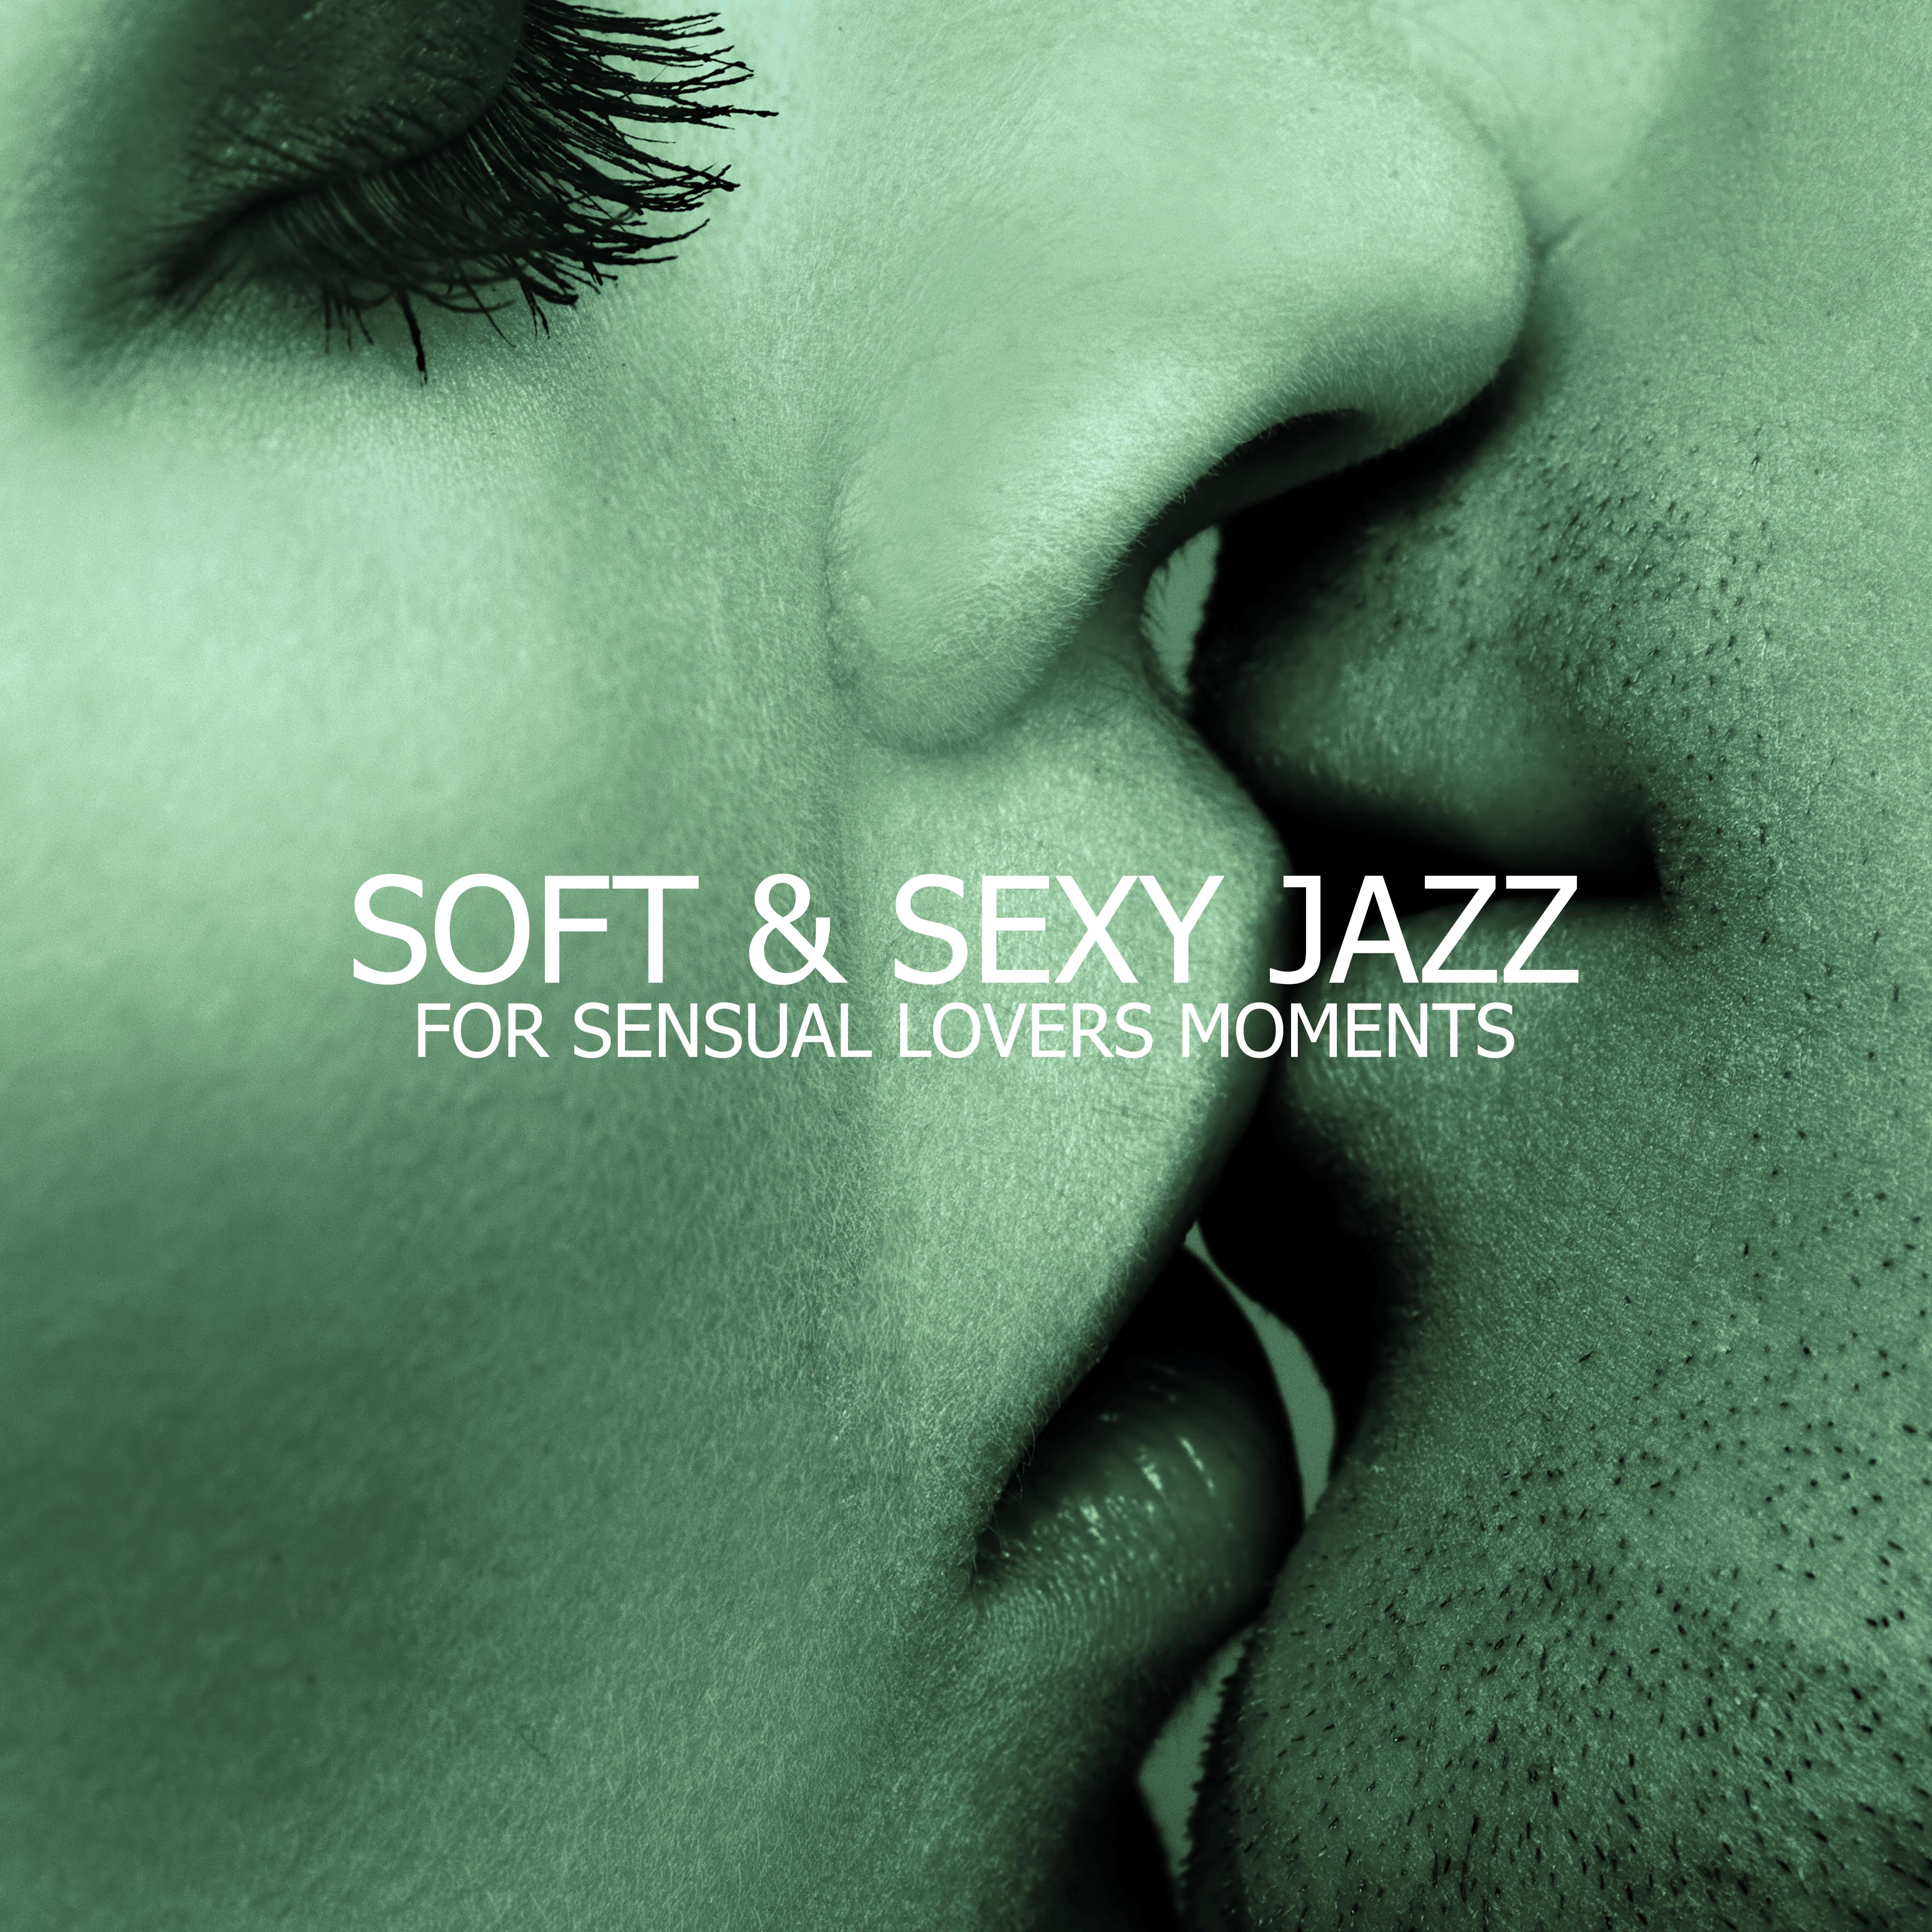 Soft & **** Jazz for Sensual Lovers Moments